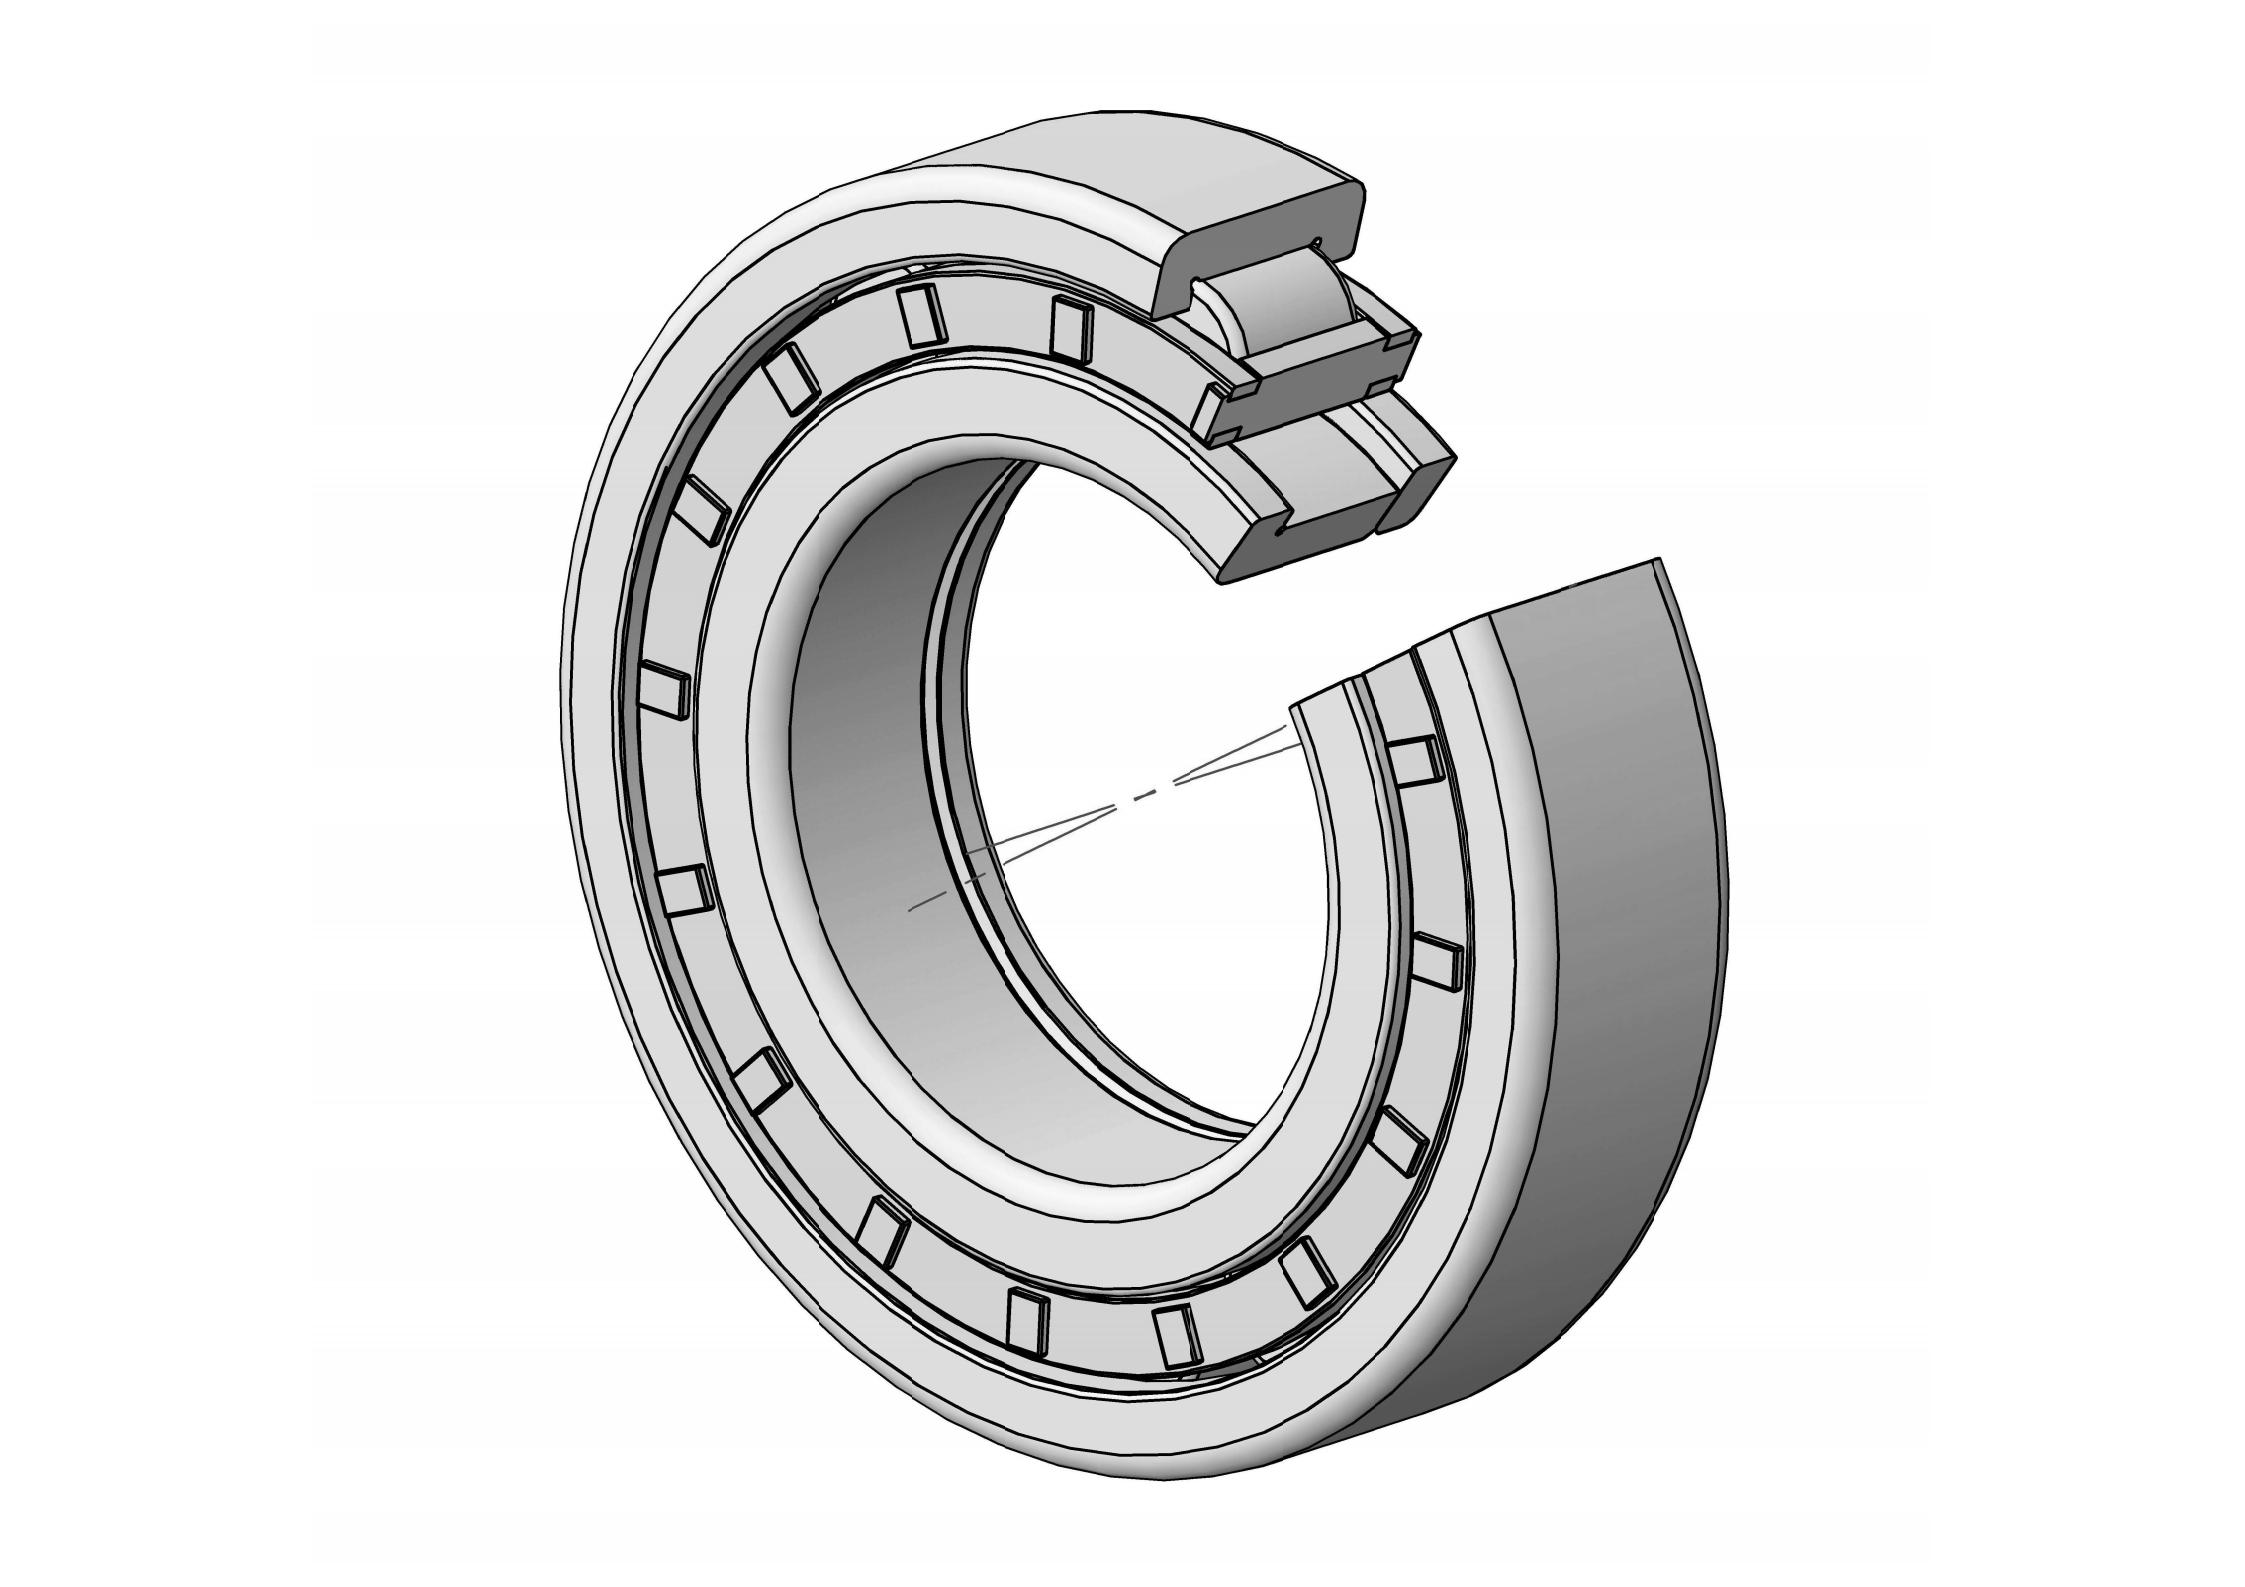 NUP216-E Single Row Cylindrical roller bearing